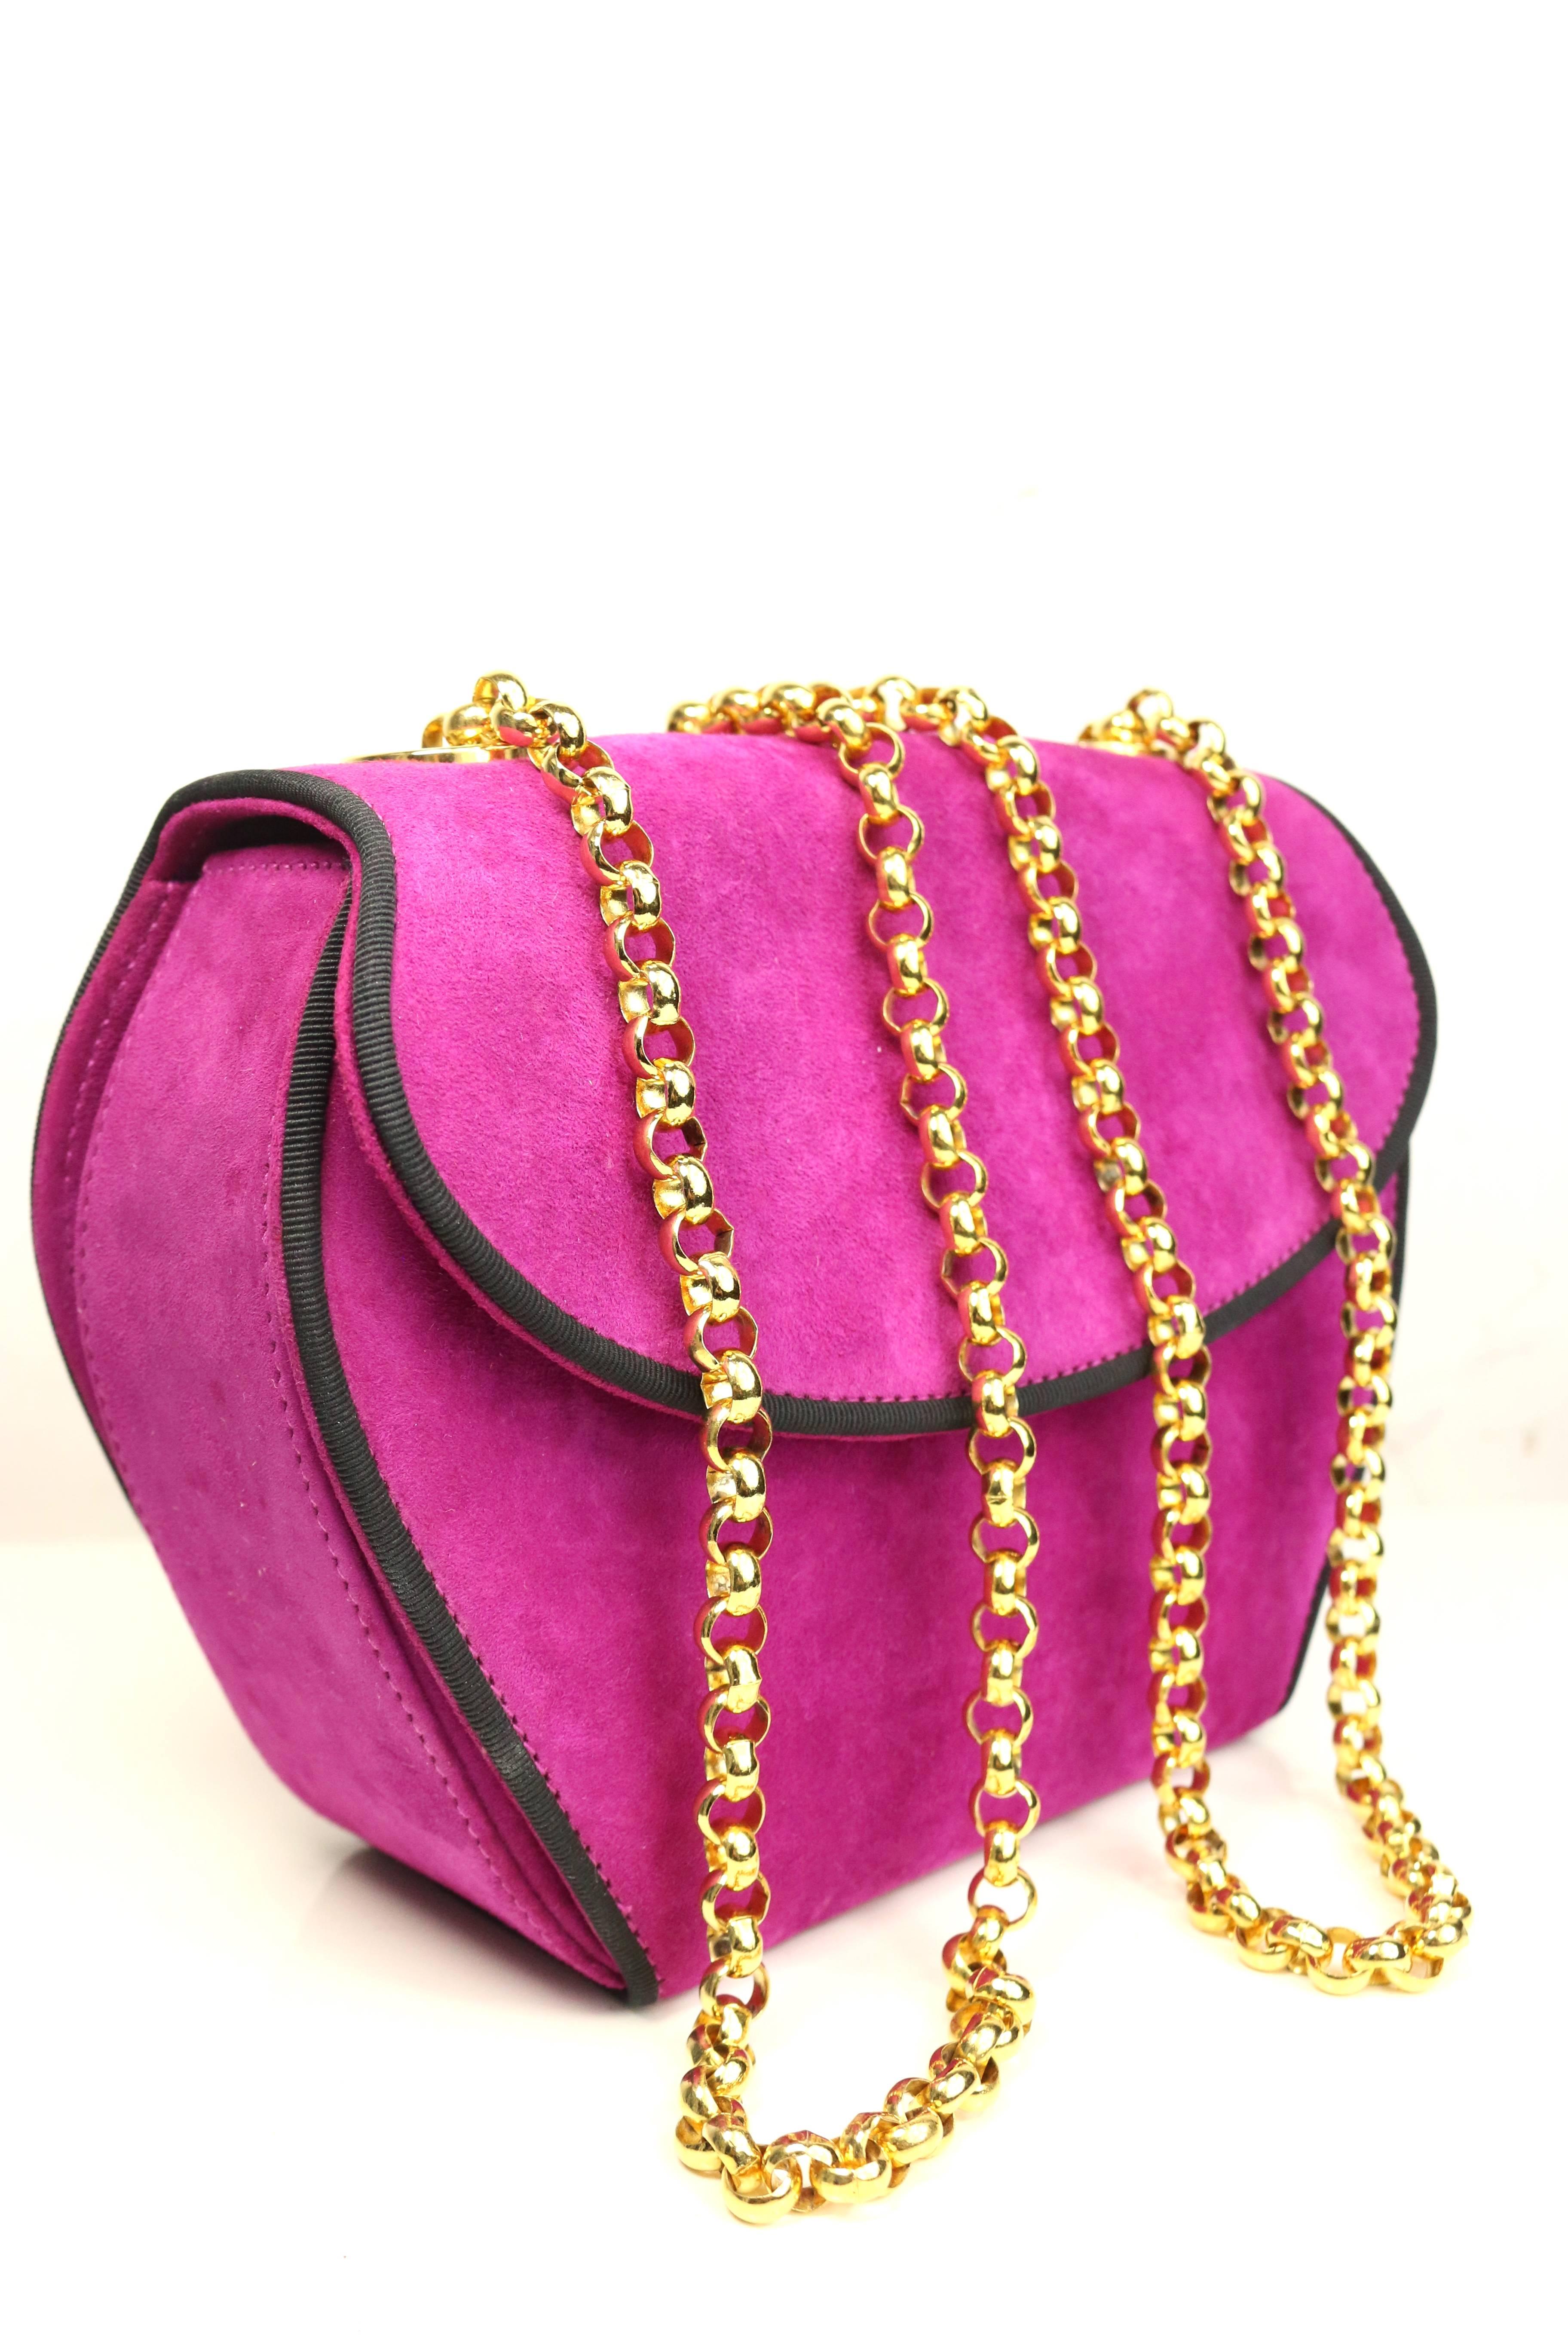 - Vintage 80s Escada pink suede shoulder bag. 

- Featuring gold toned hardware link chain strap. 

- Flap with snap button fastening. 

- Two compartments interior with zip closure. 

- Length: 7.5 inches. Height: 6 inches. Width: 3 inches.